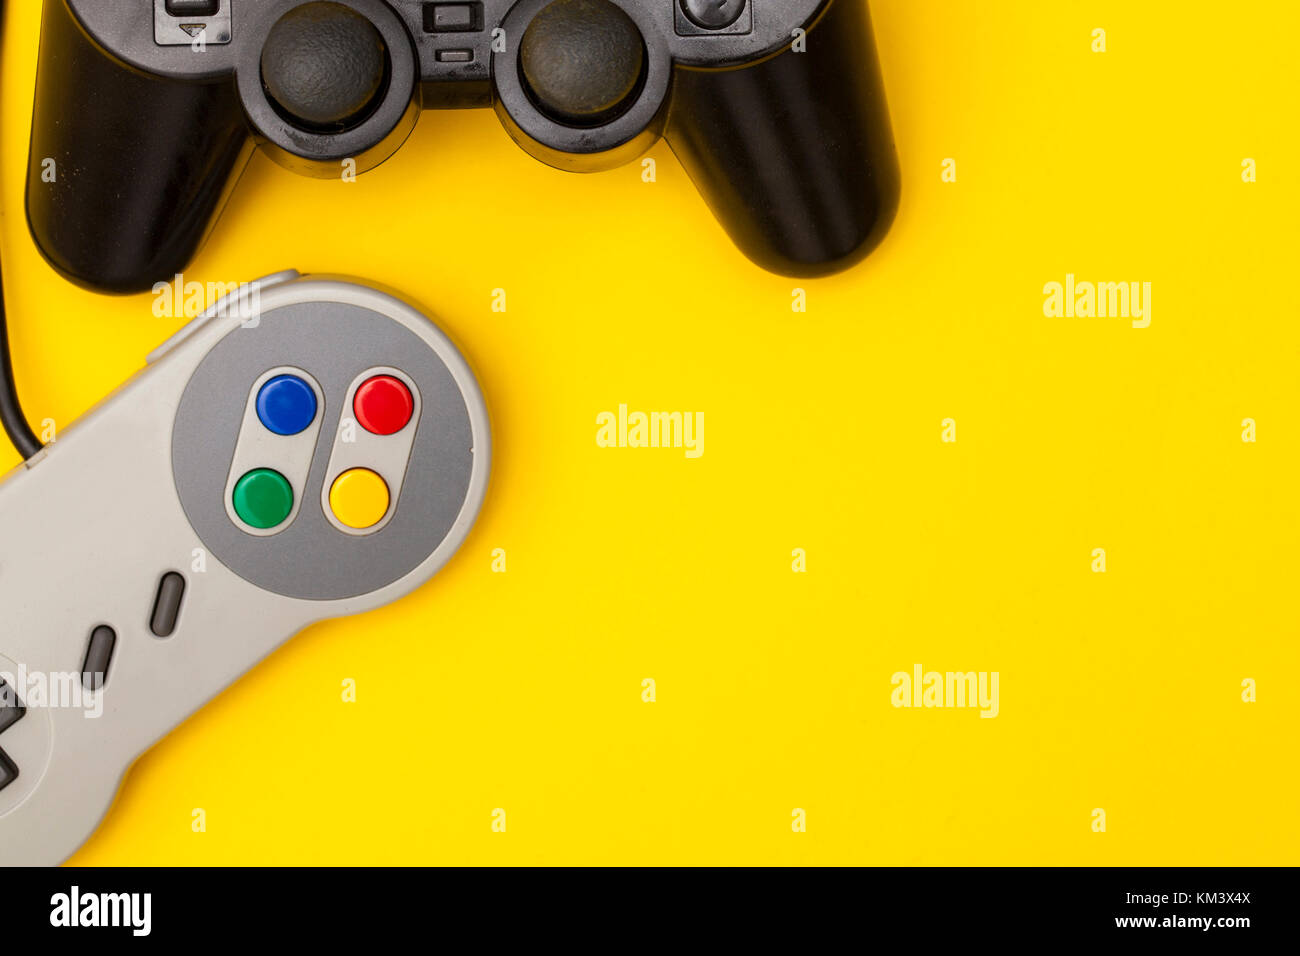 Retro computer gaming controllers on a bright yellow background Stock Photo